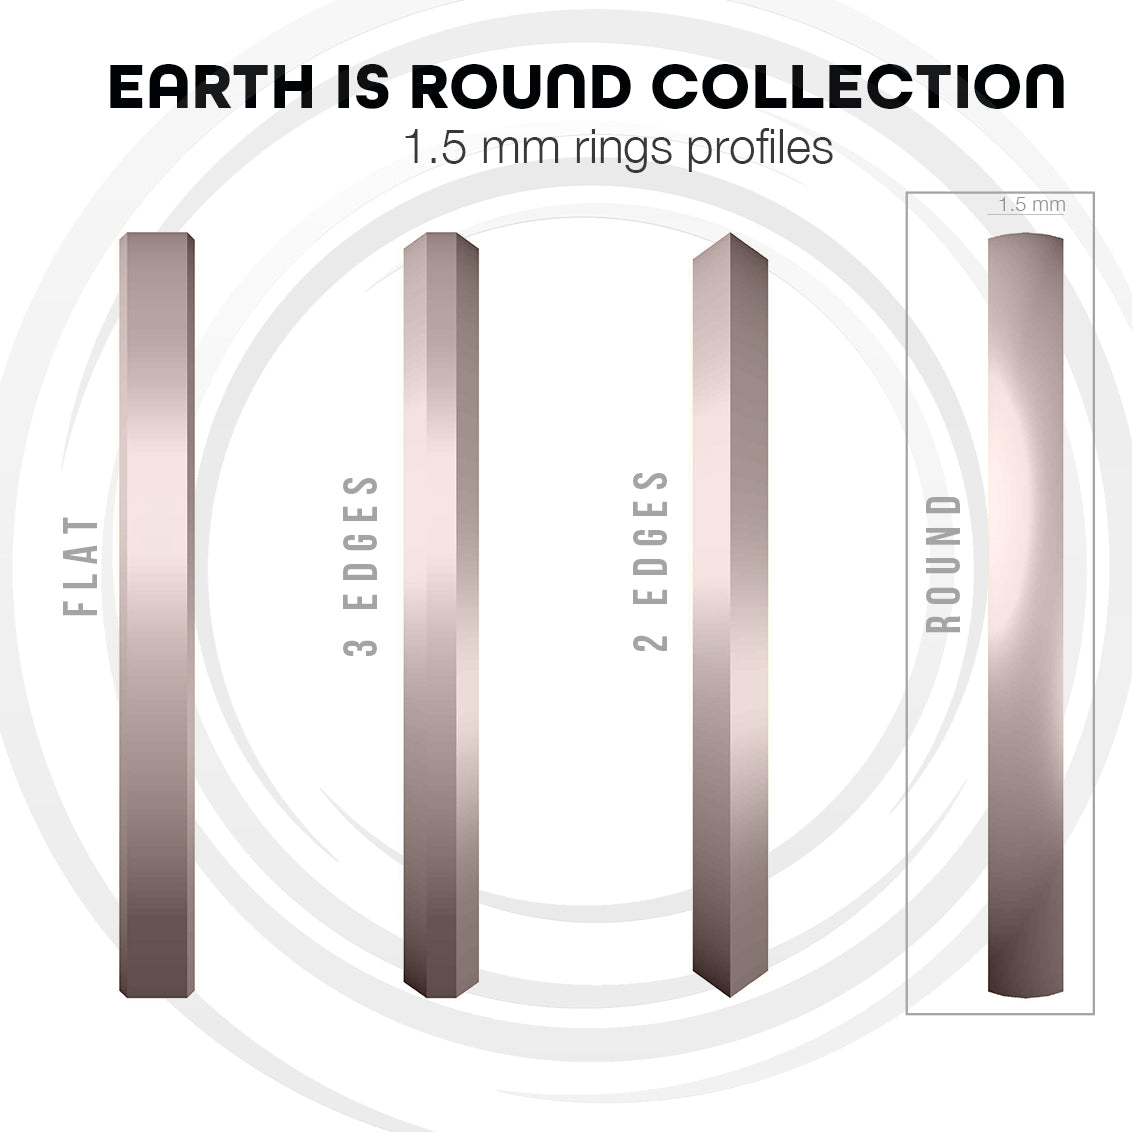 Bague EARTH IS ROUND 1,5mm profil rond Platine 600